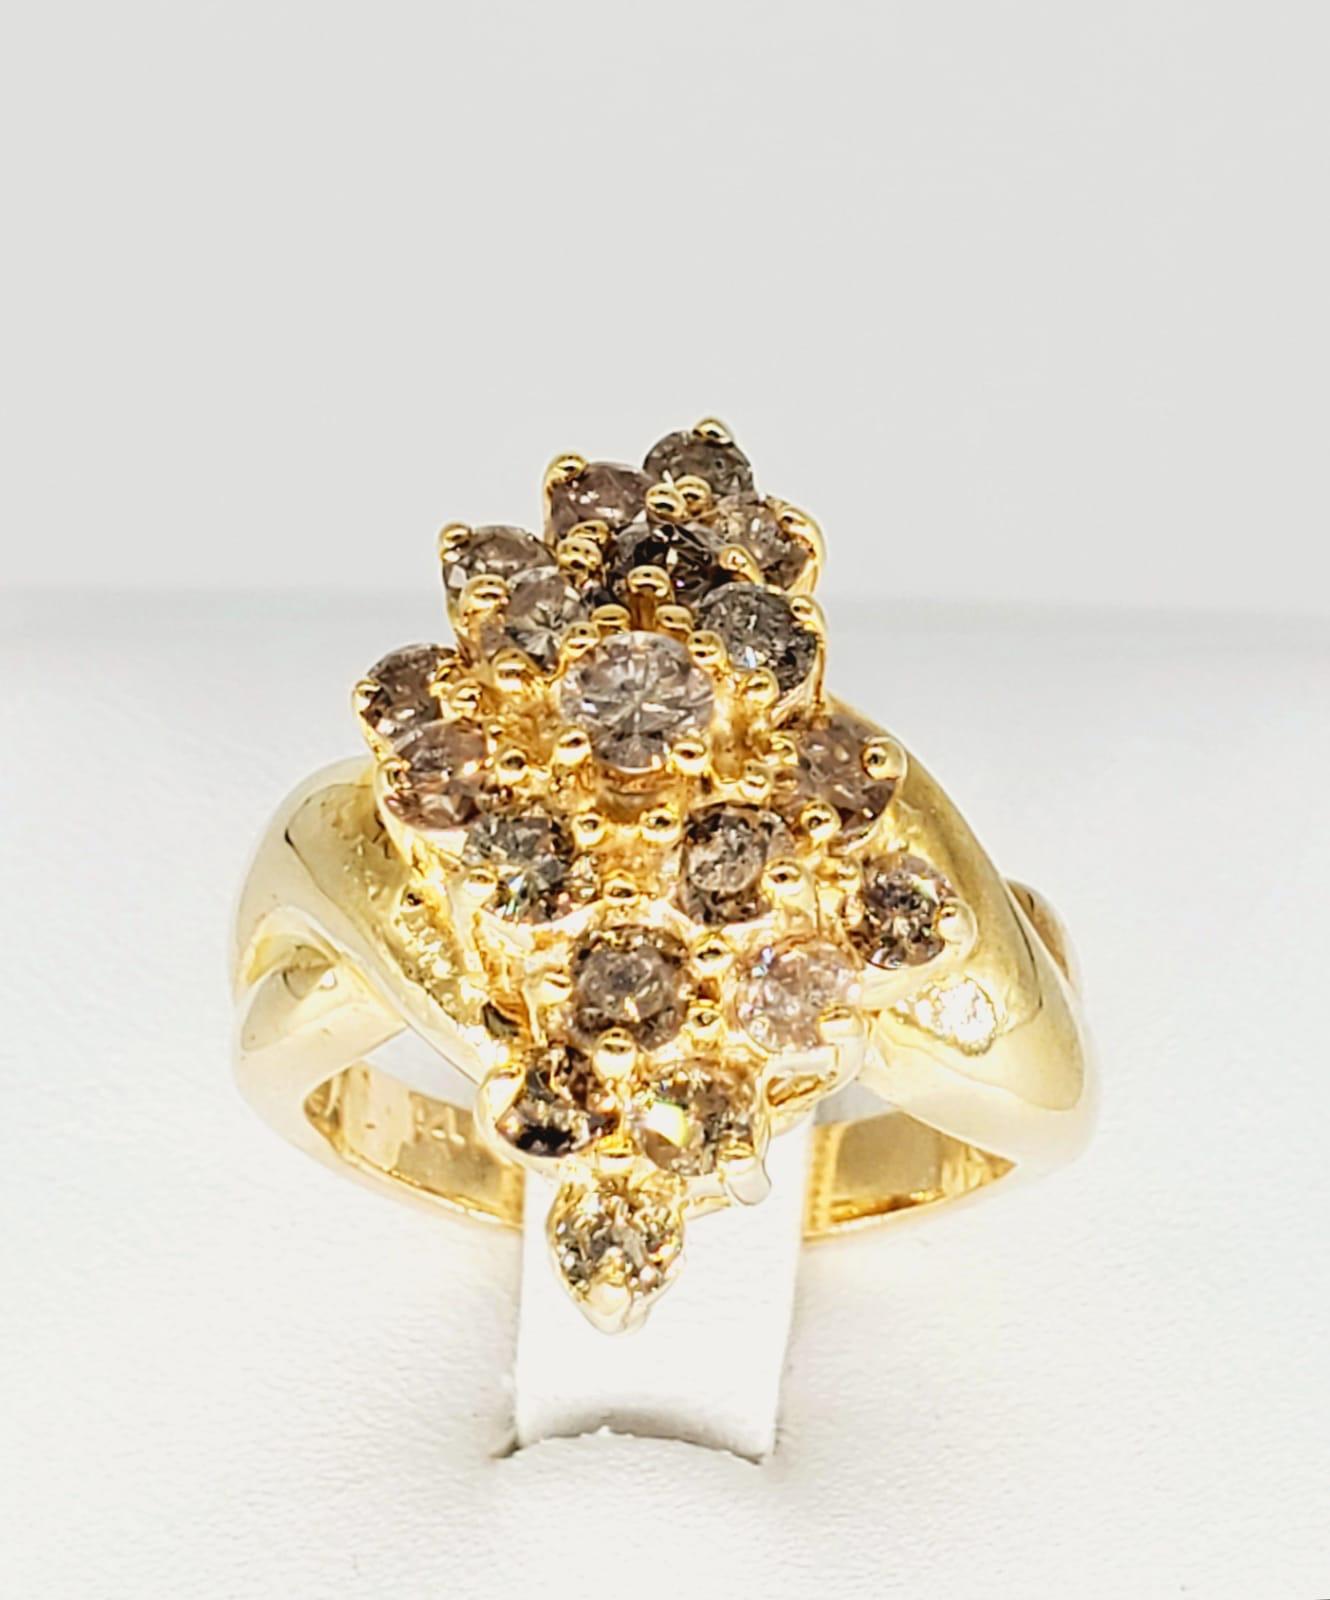 Vintage 3.50 Carat Sparkling Champagne Diamonds Cluster Ring. This ring is very sparkly when light hits it. The round champagne diamonds are brought together to make this stunning ring that covers a big part on the finger making it stand out